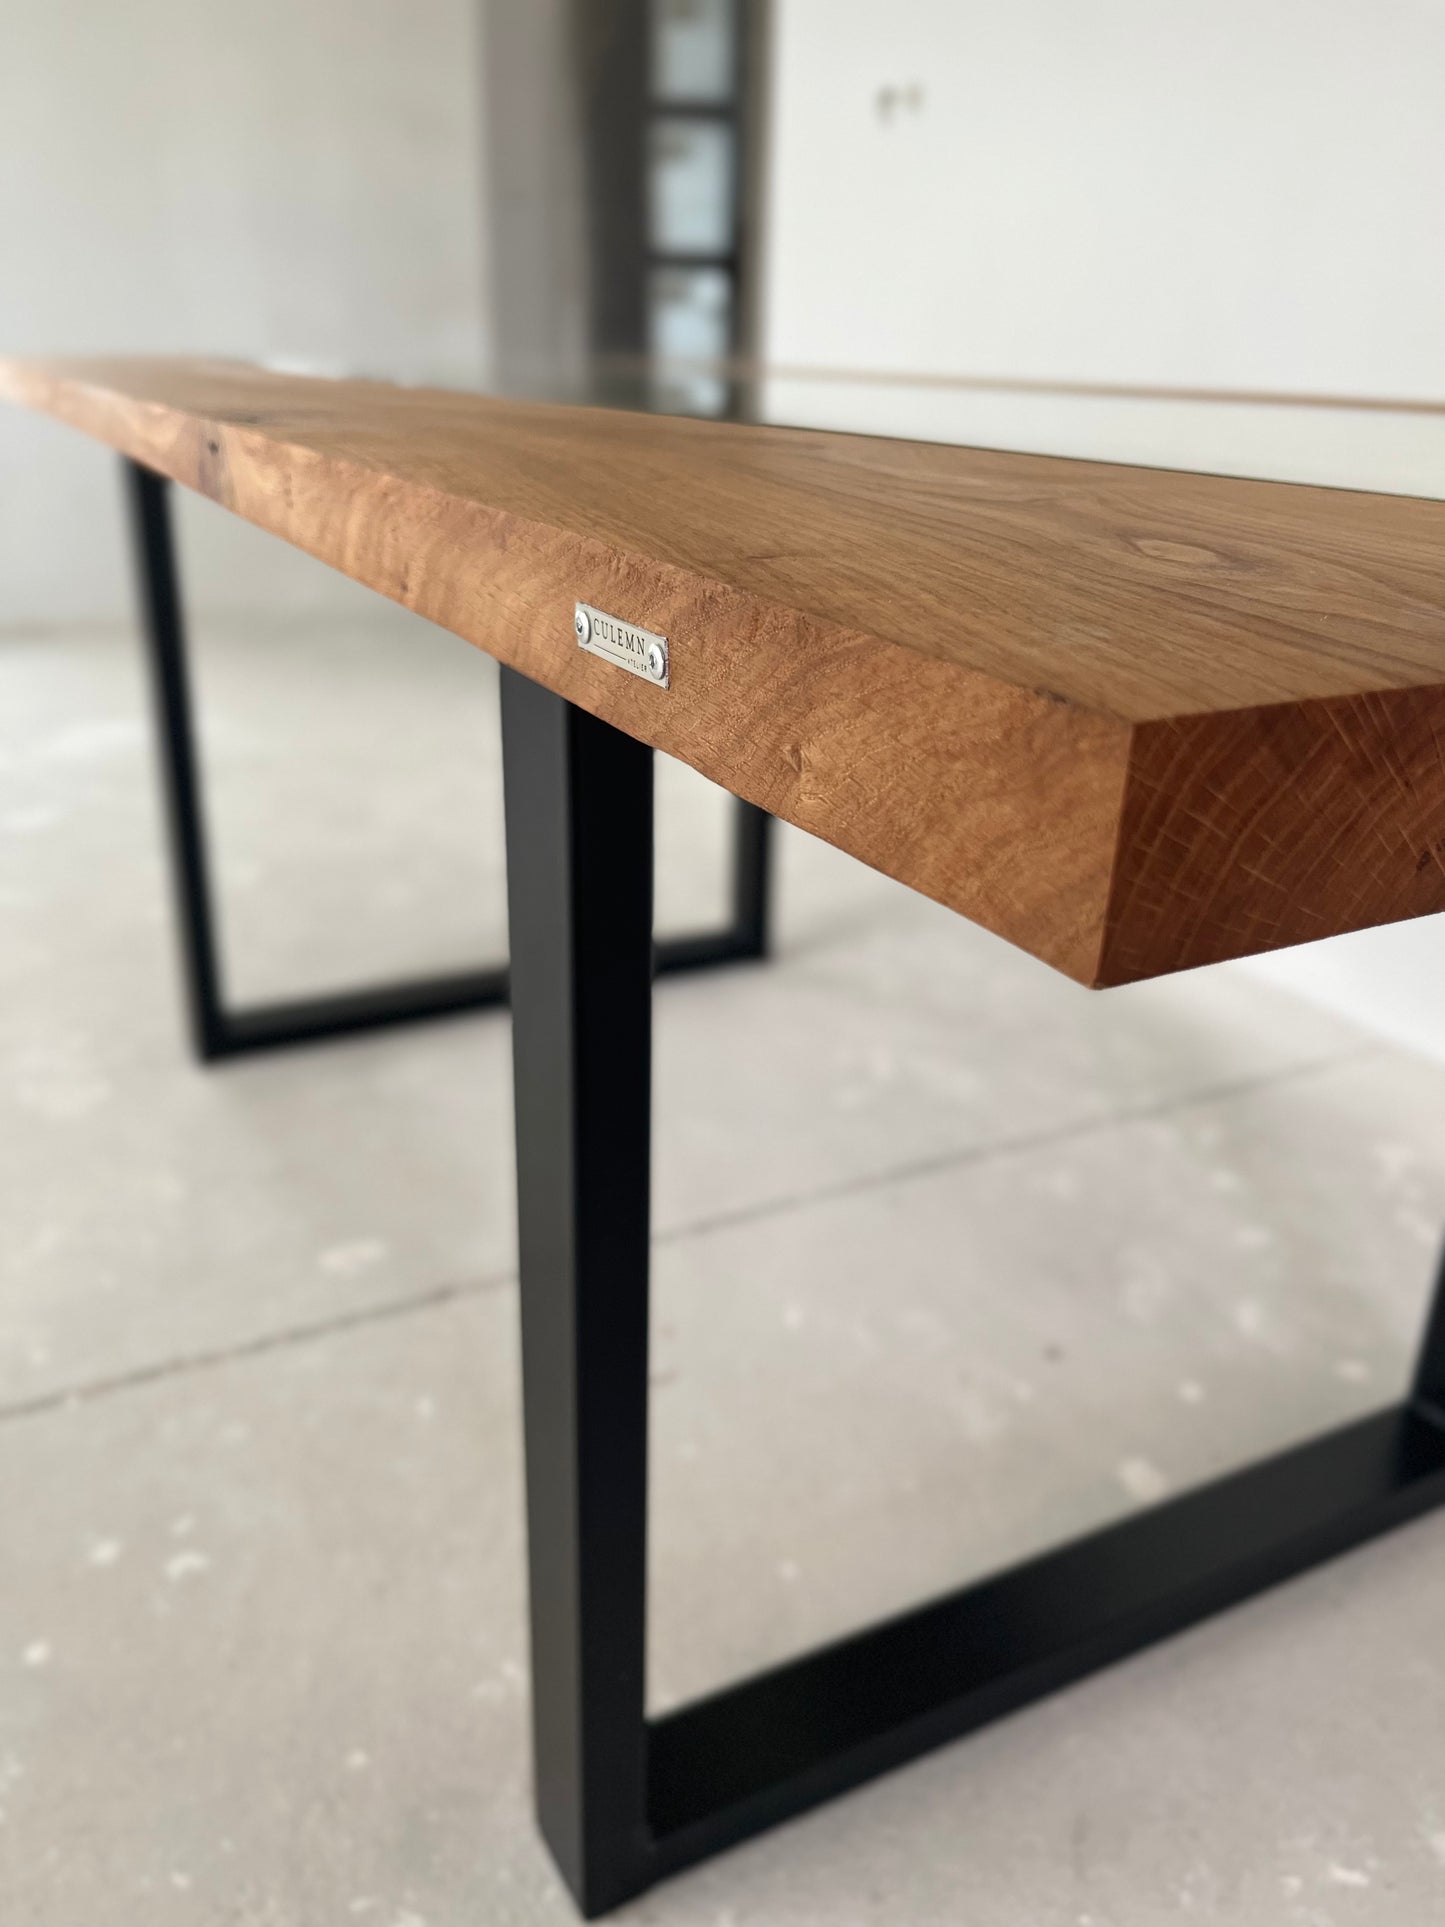 Solid oak table with natural edges, glass and ARON metal legs